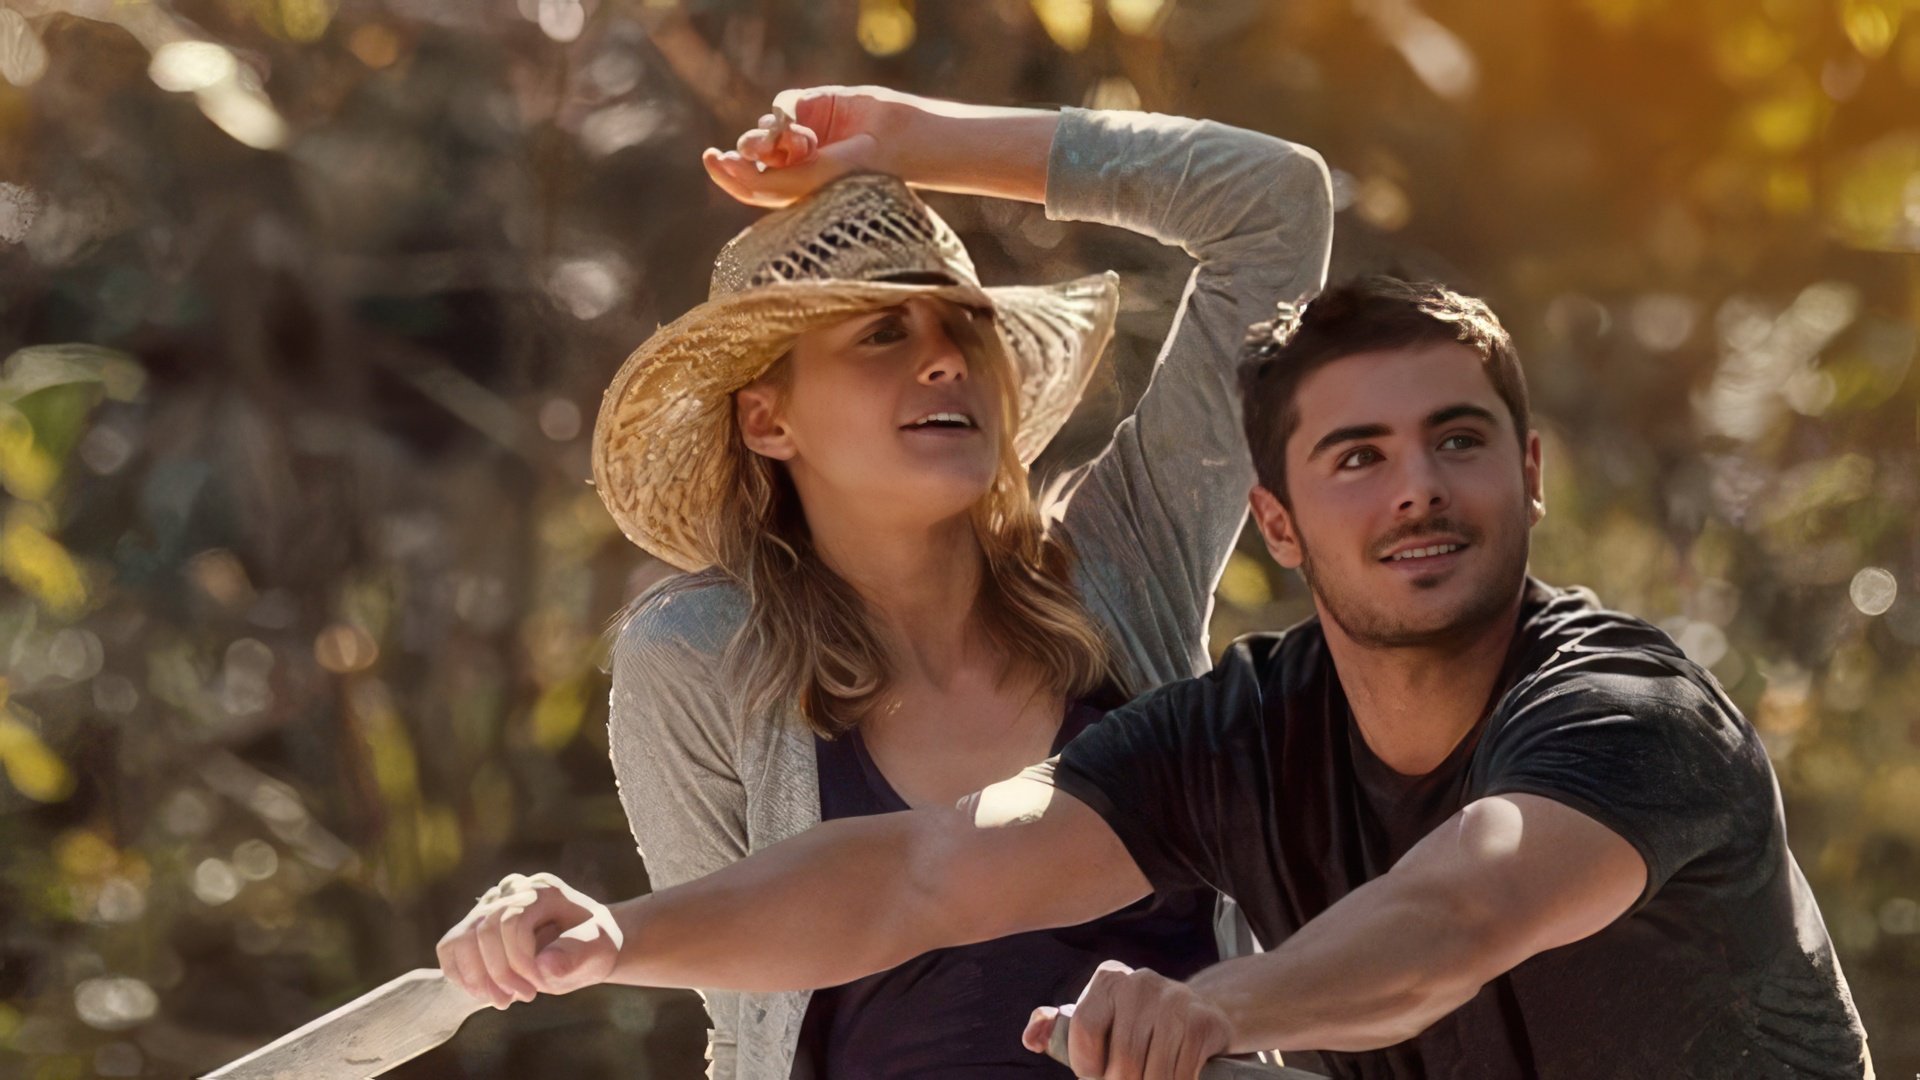 Taylor Schilling and Zac Efron in 'The Lucky One'